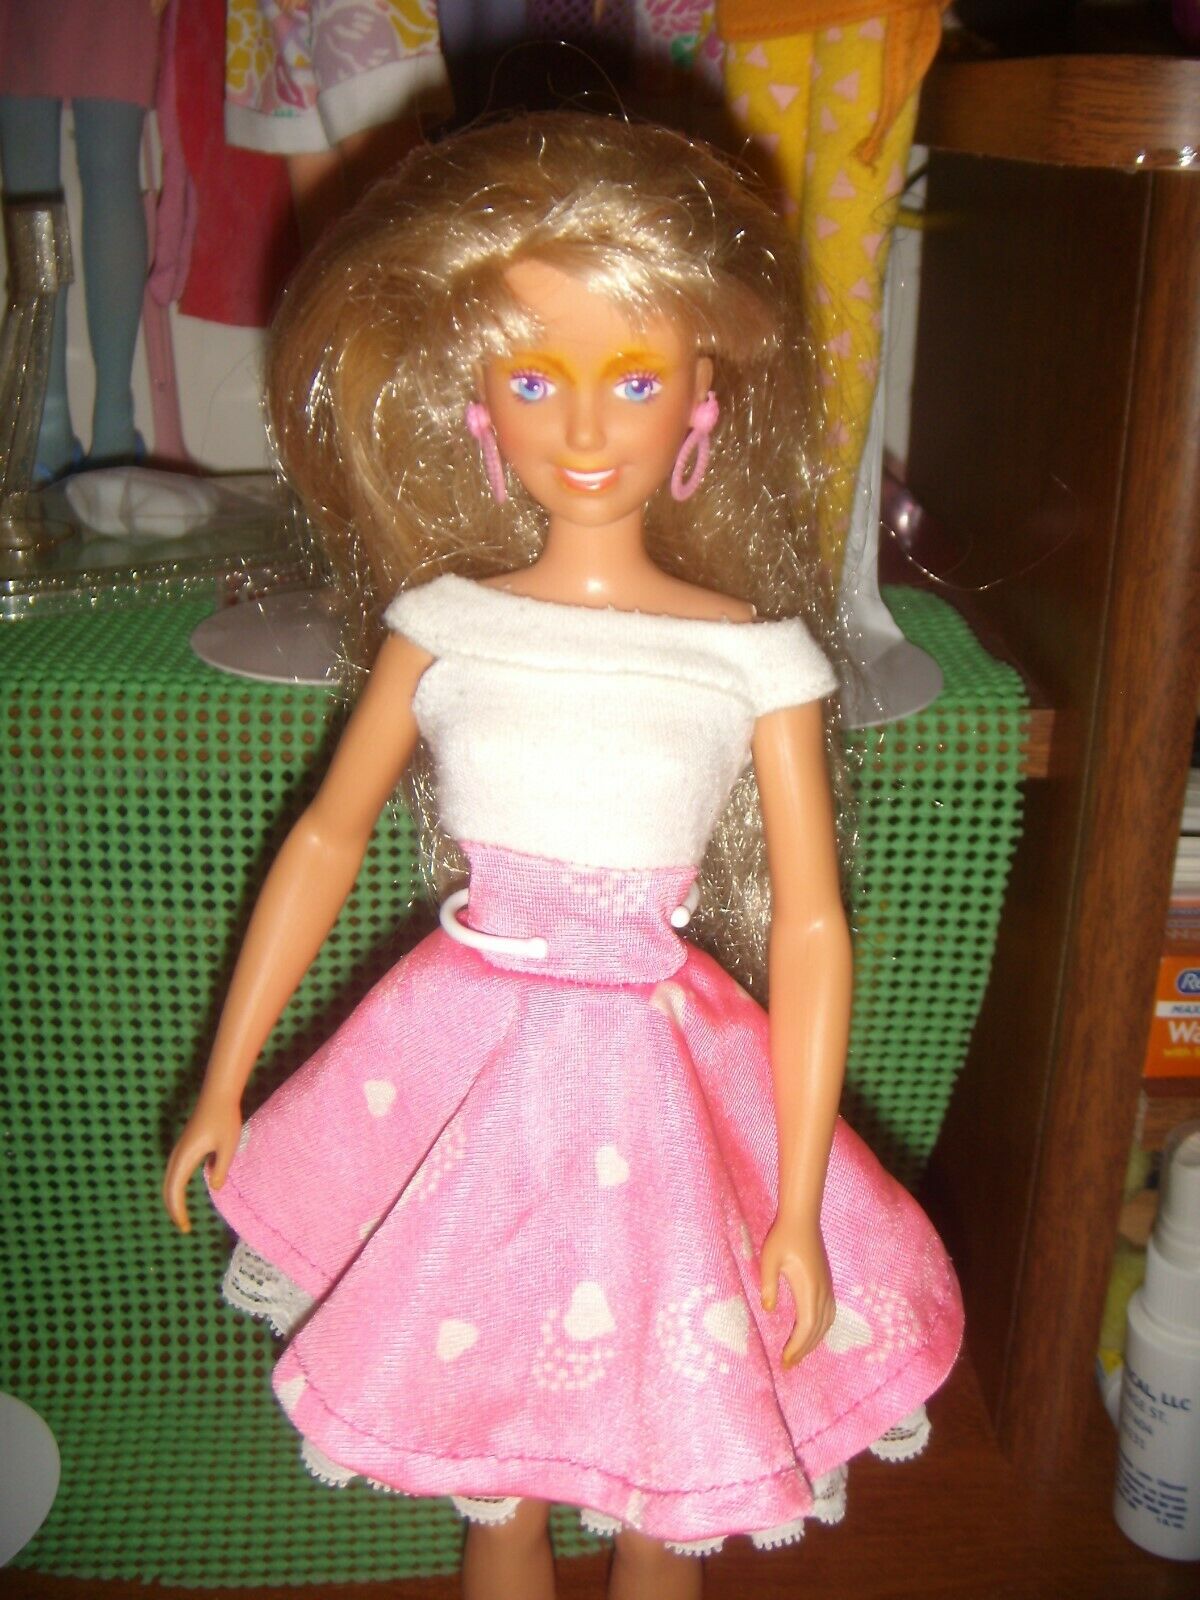 HASBRO'S 1980'S MAXIE DOLL IN PRETTY OUTFIT, LOT#2